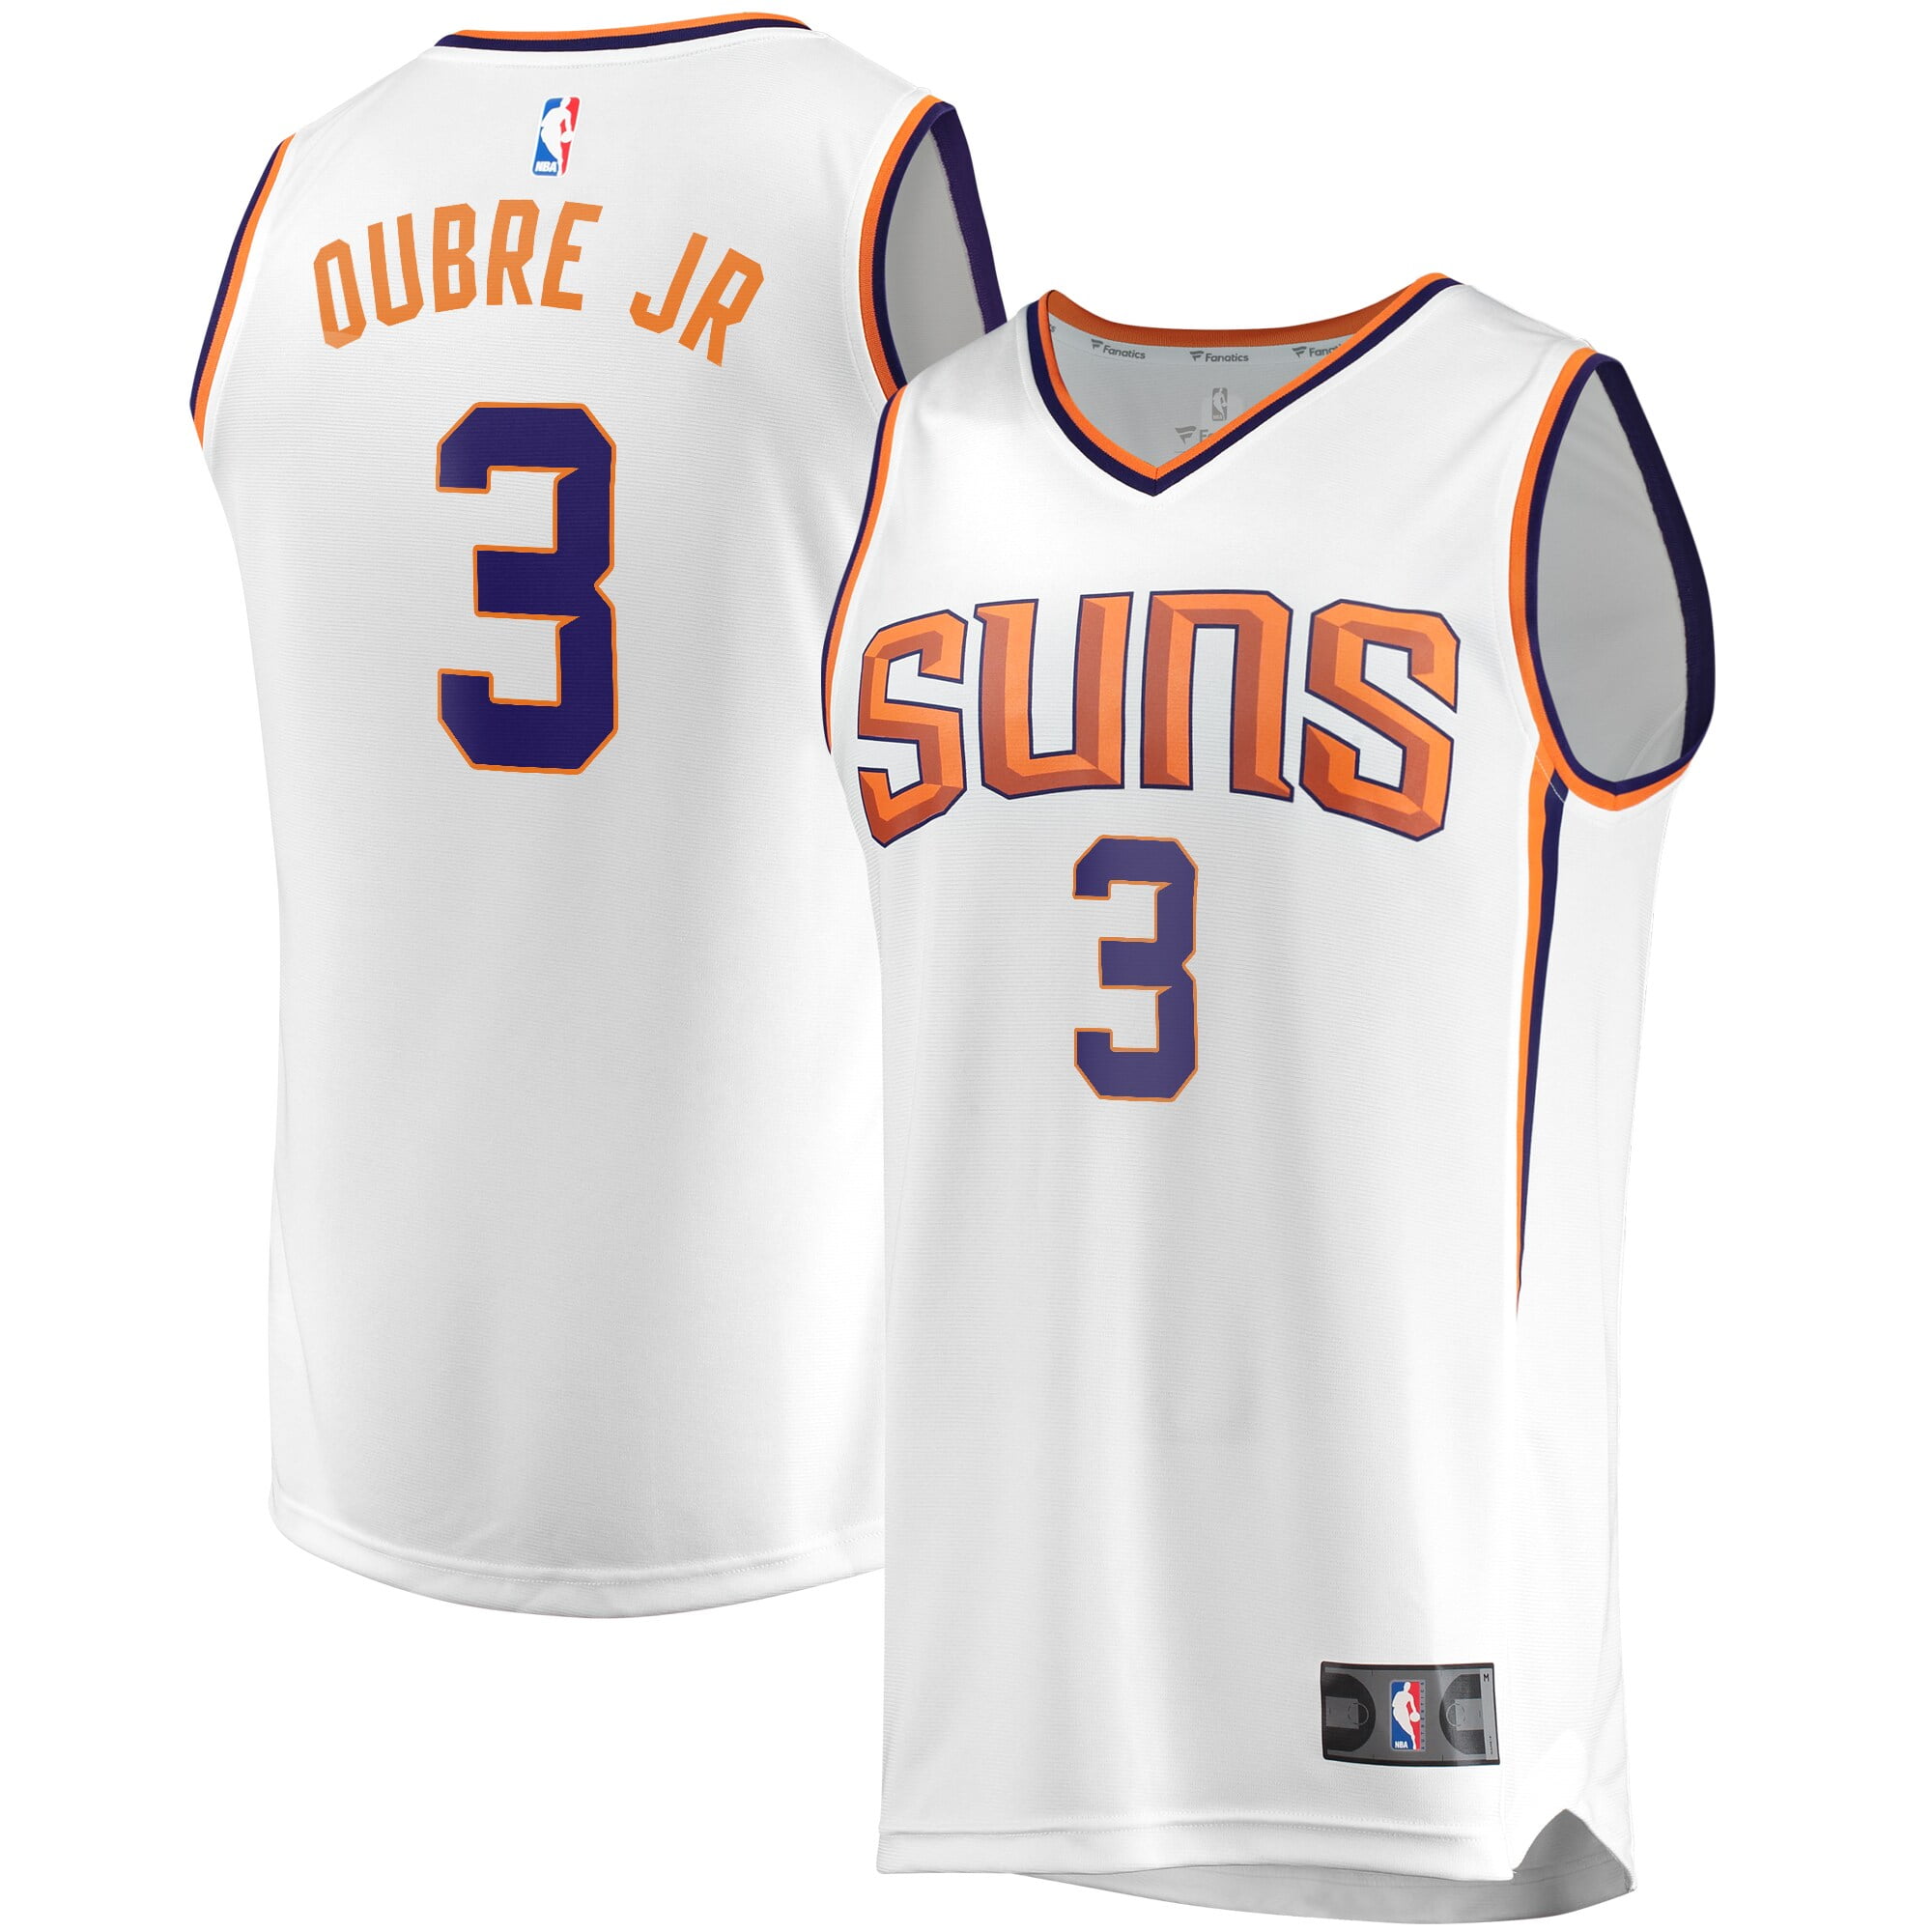 suns kelly oubre jersey